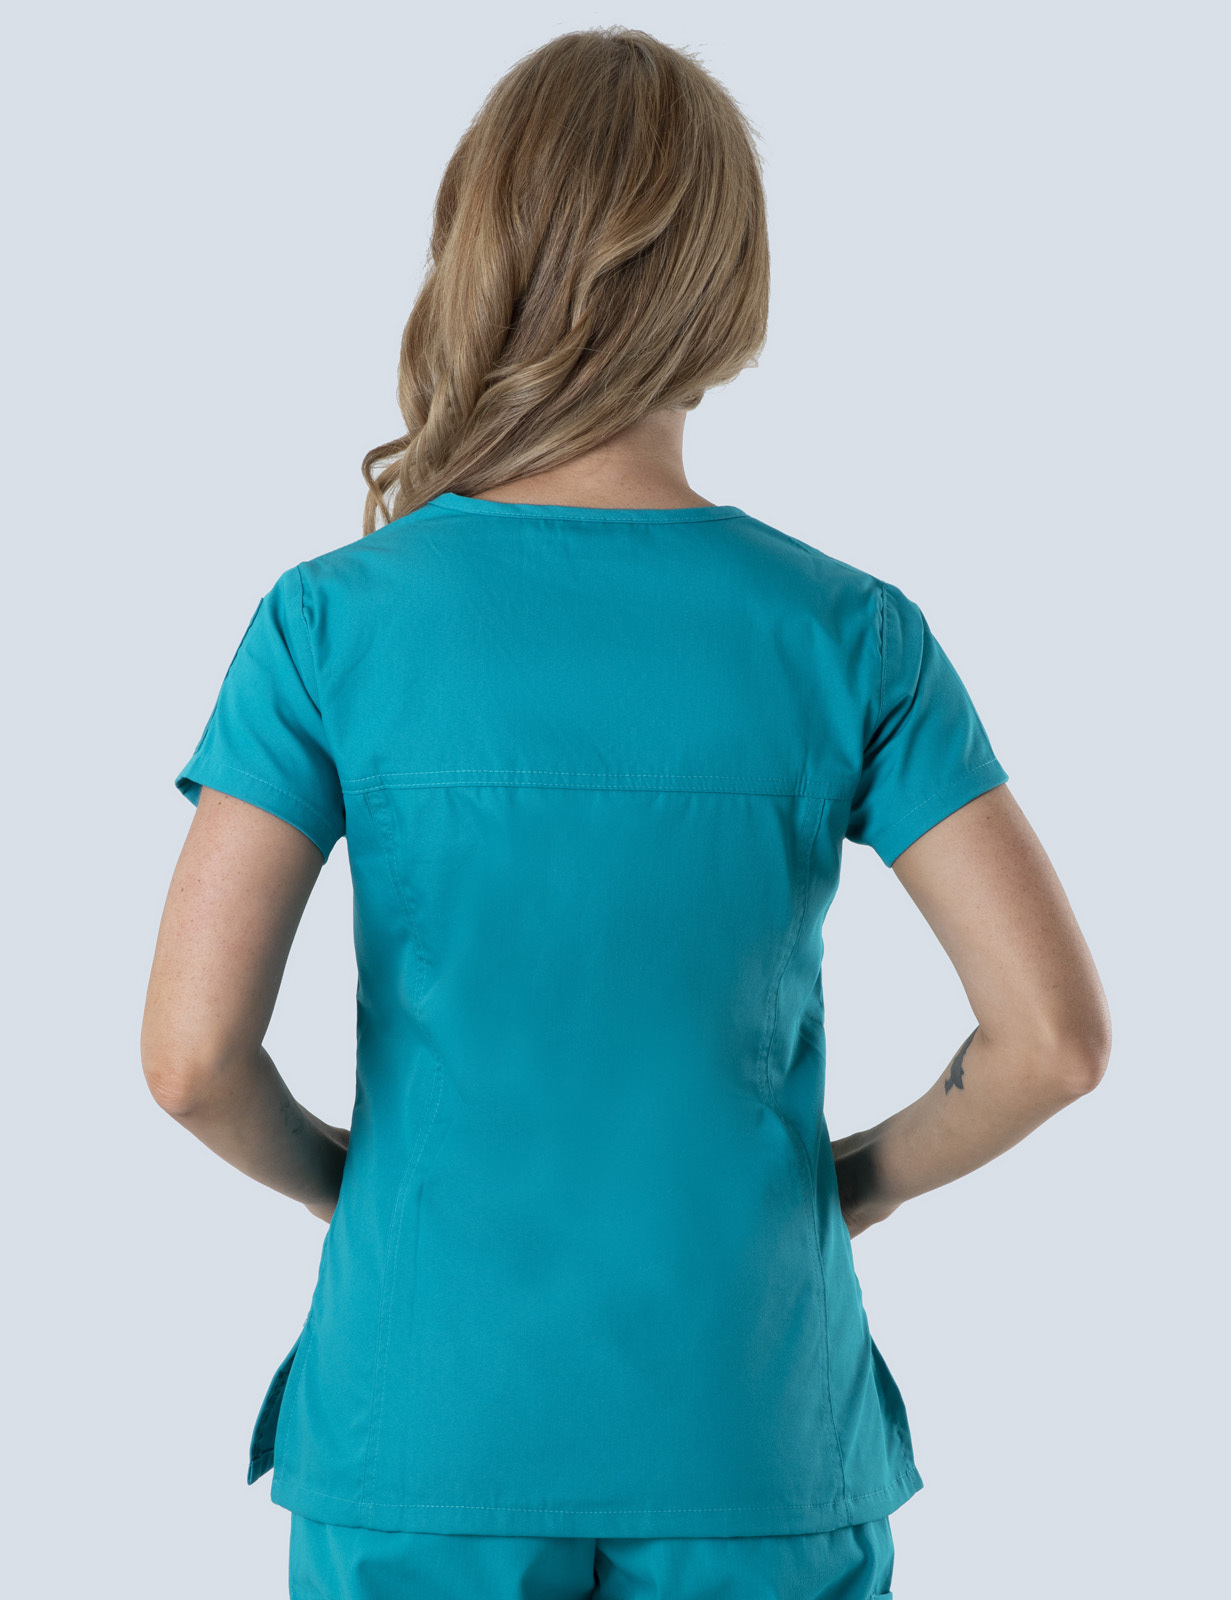 Women's Fit Solid Scrub Top - Teal - XX Small - 2